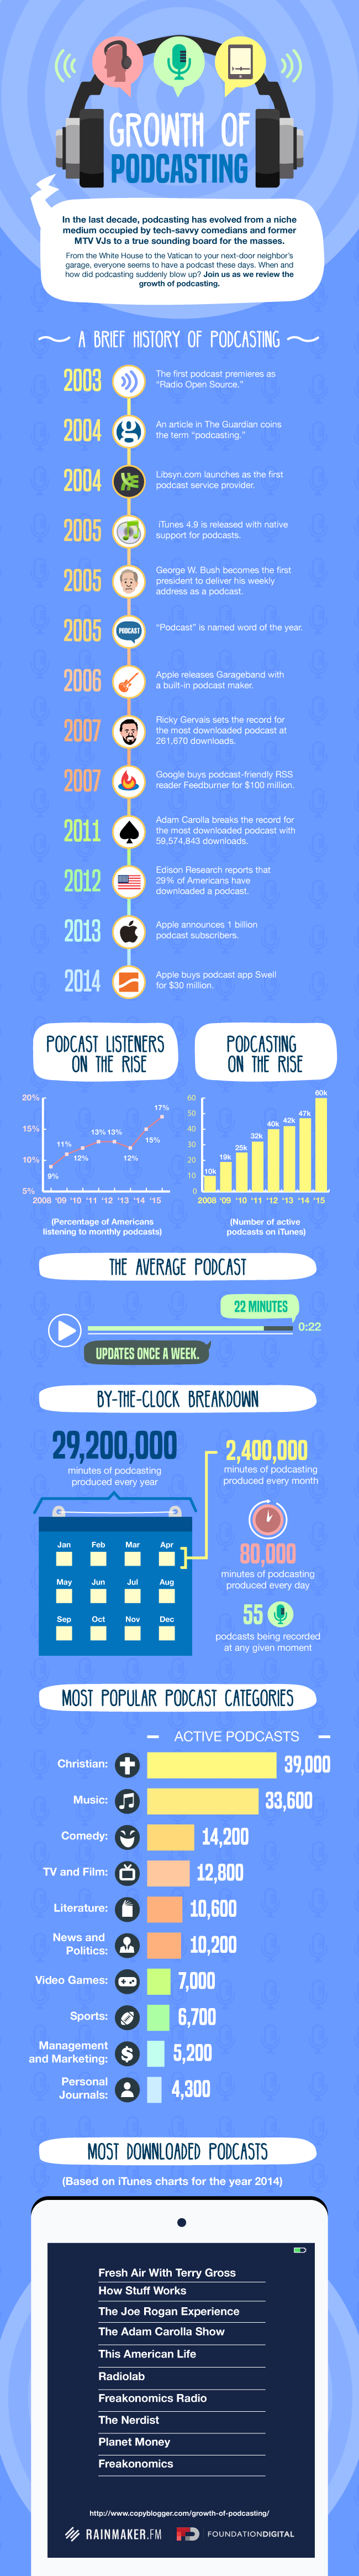 From 2003 to 2016: The Astounding Growth of Podcasting [Infographic]